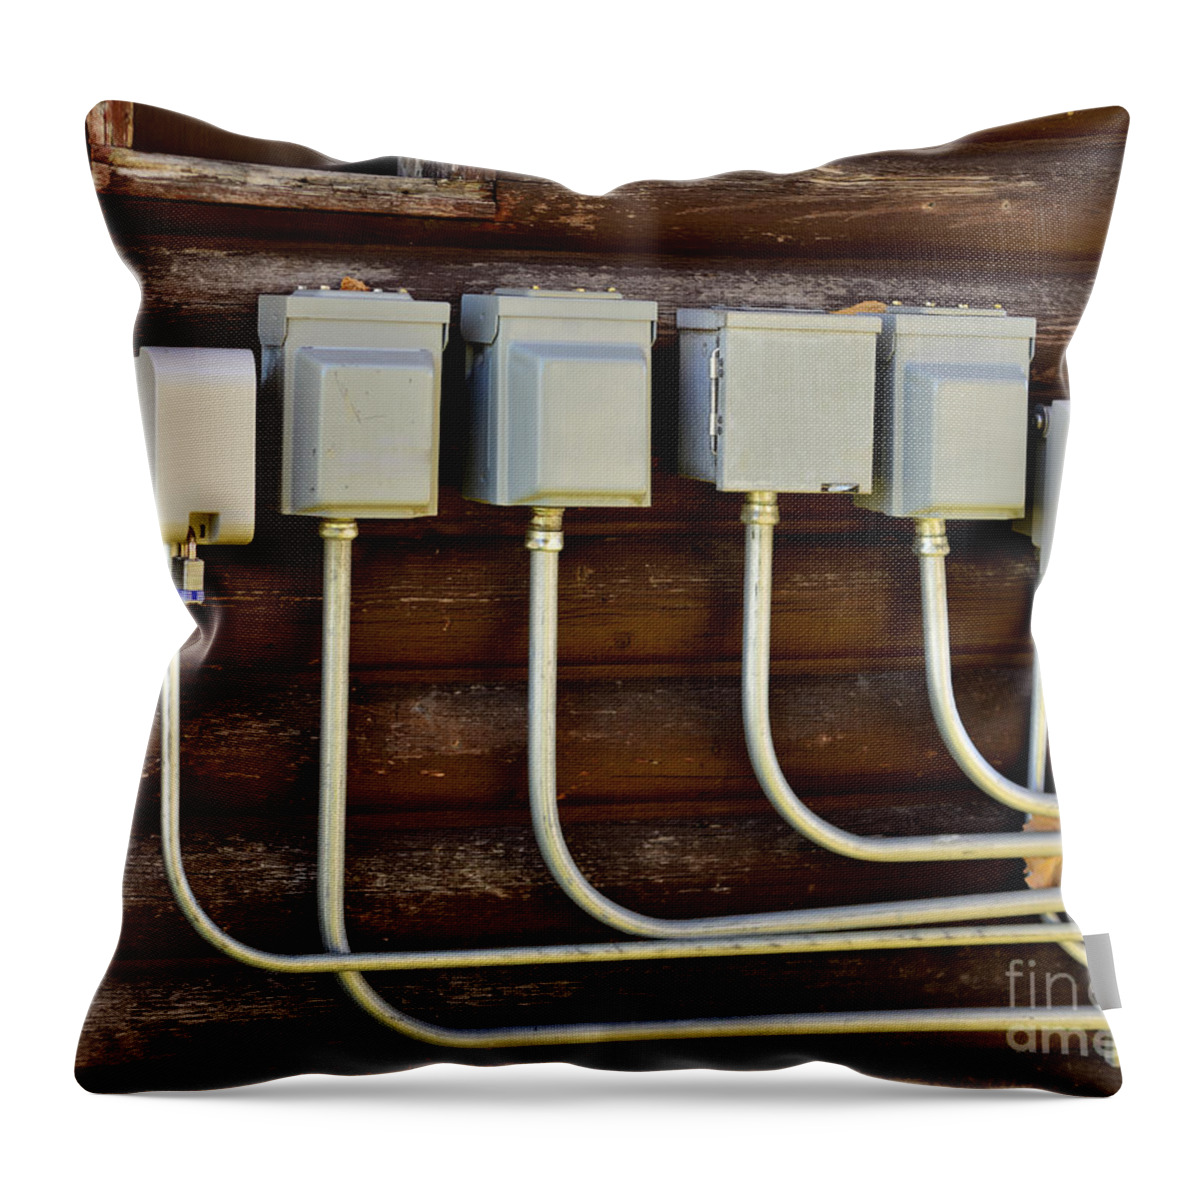 Electrical Boxes Throw Pillow featuring the photograph Outdoor Electrical Boxes by Kae Cheatham